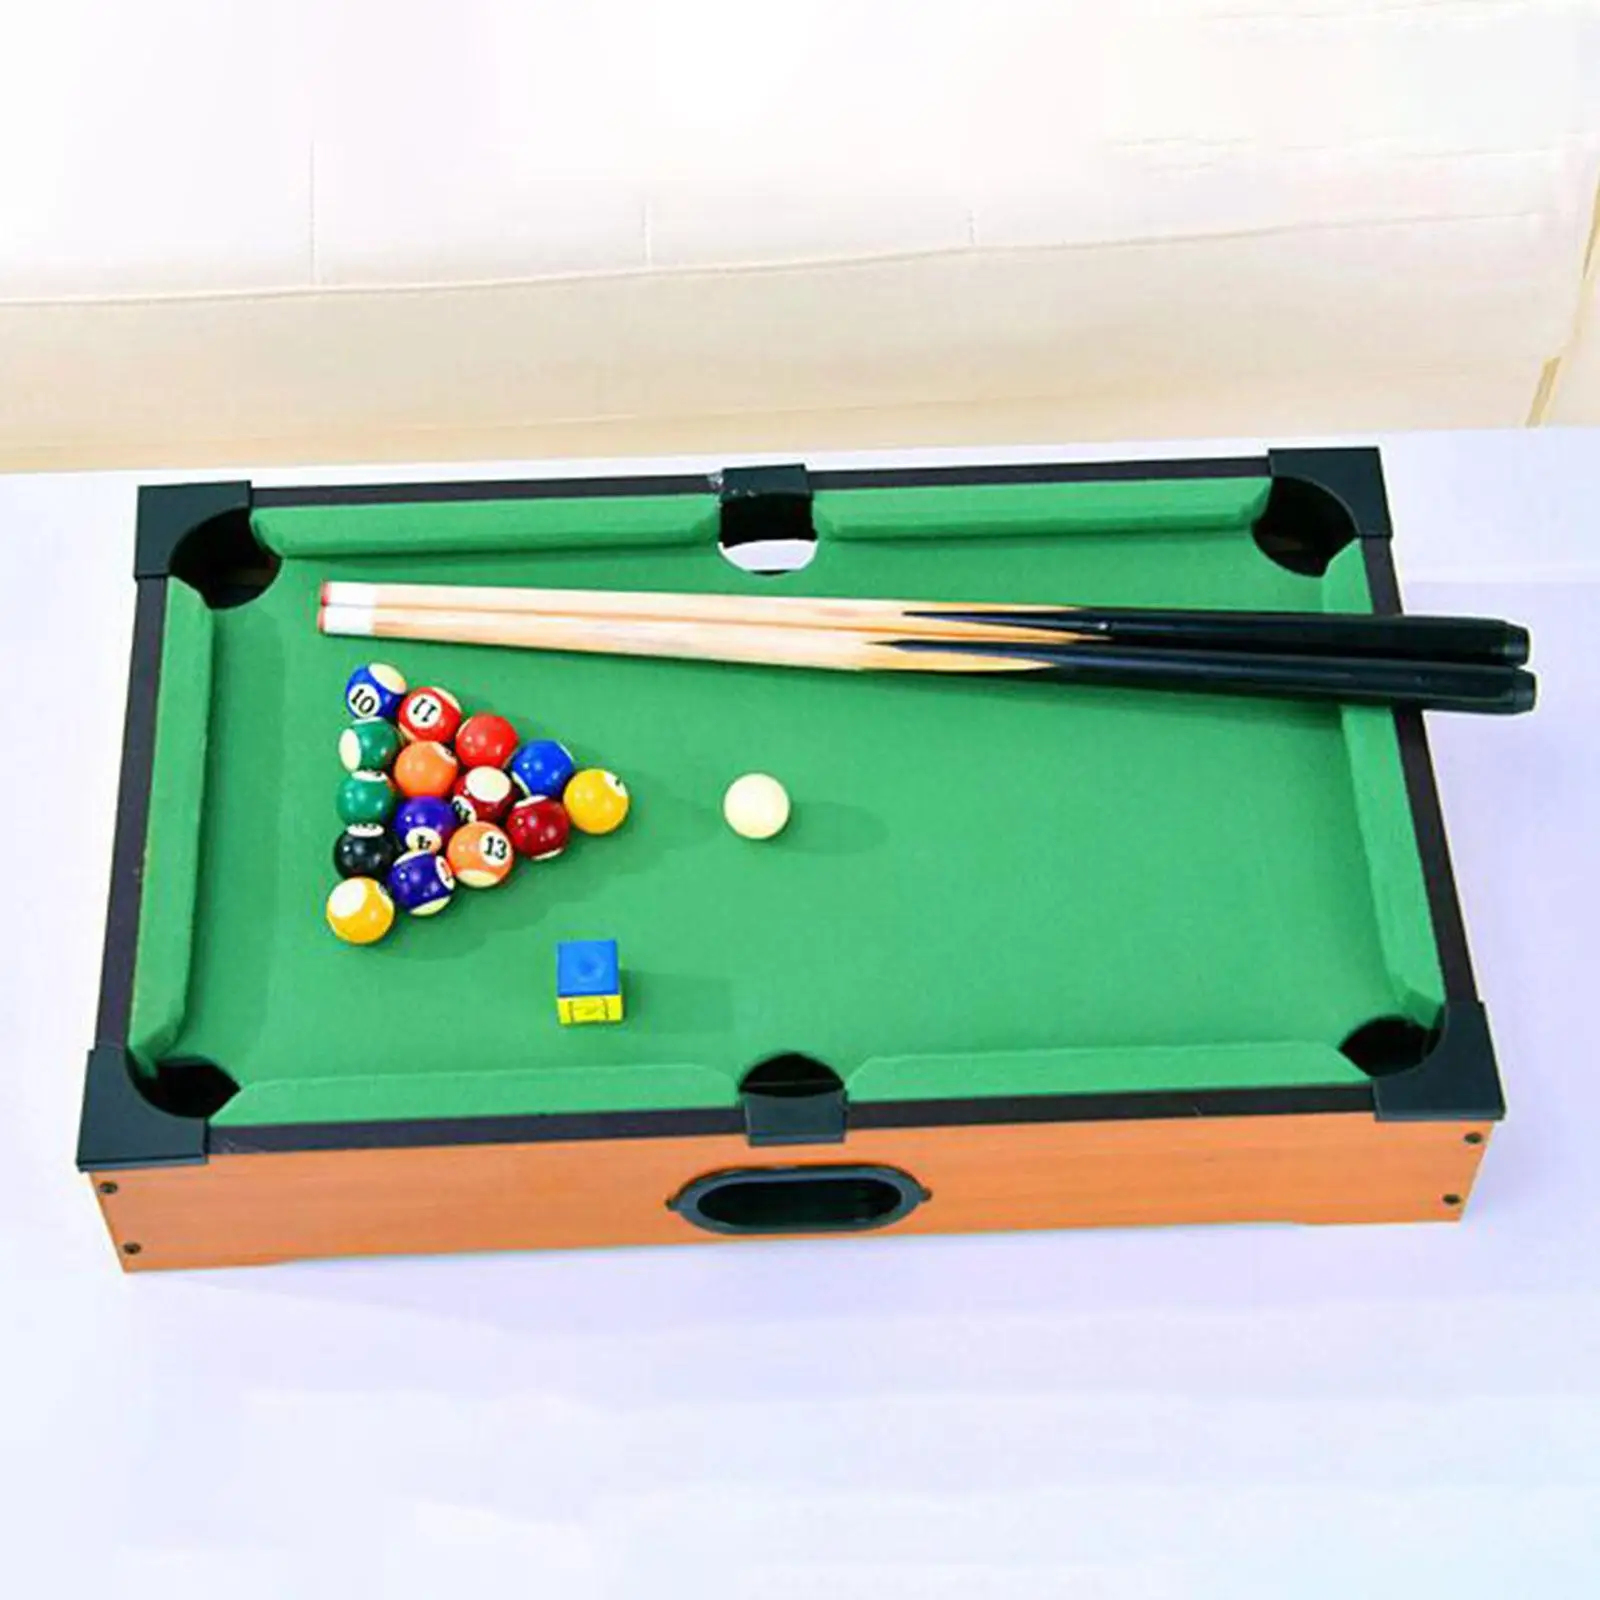 Mini Tabletop Pool Set Balls Easily Set up Playset Motor Skills Billiards Toy Wooden Snooker for Party Desk Home Game Room Gift